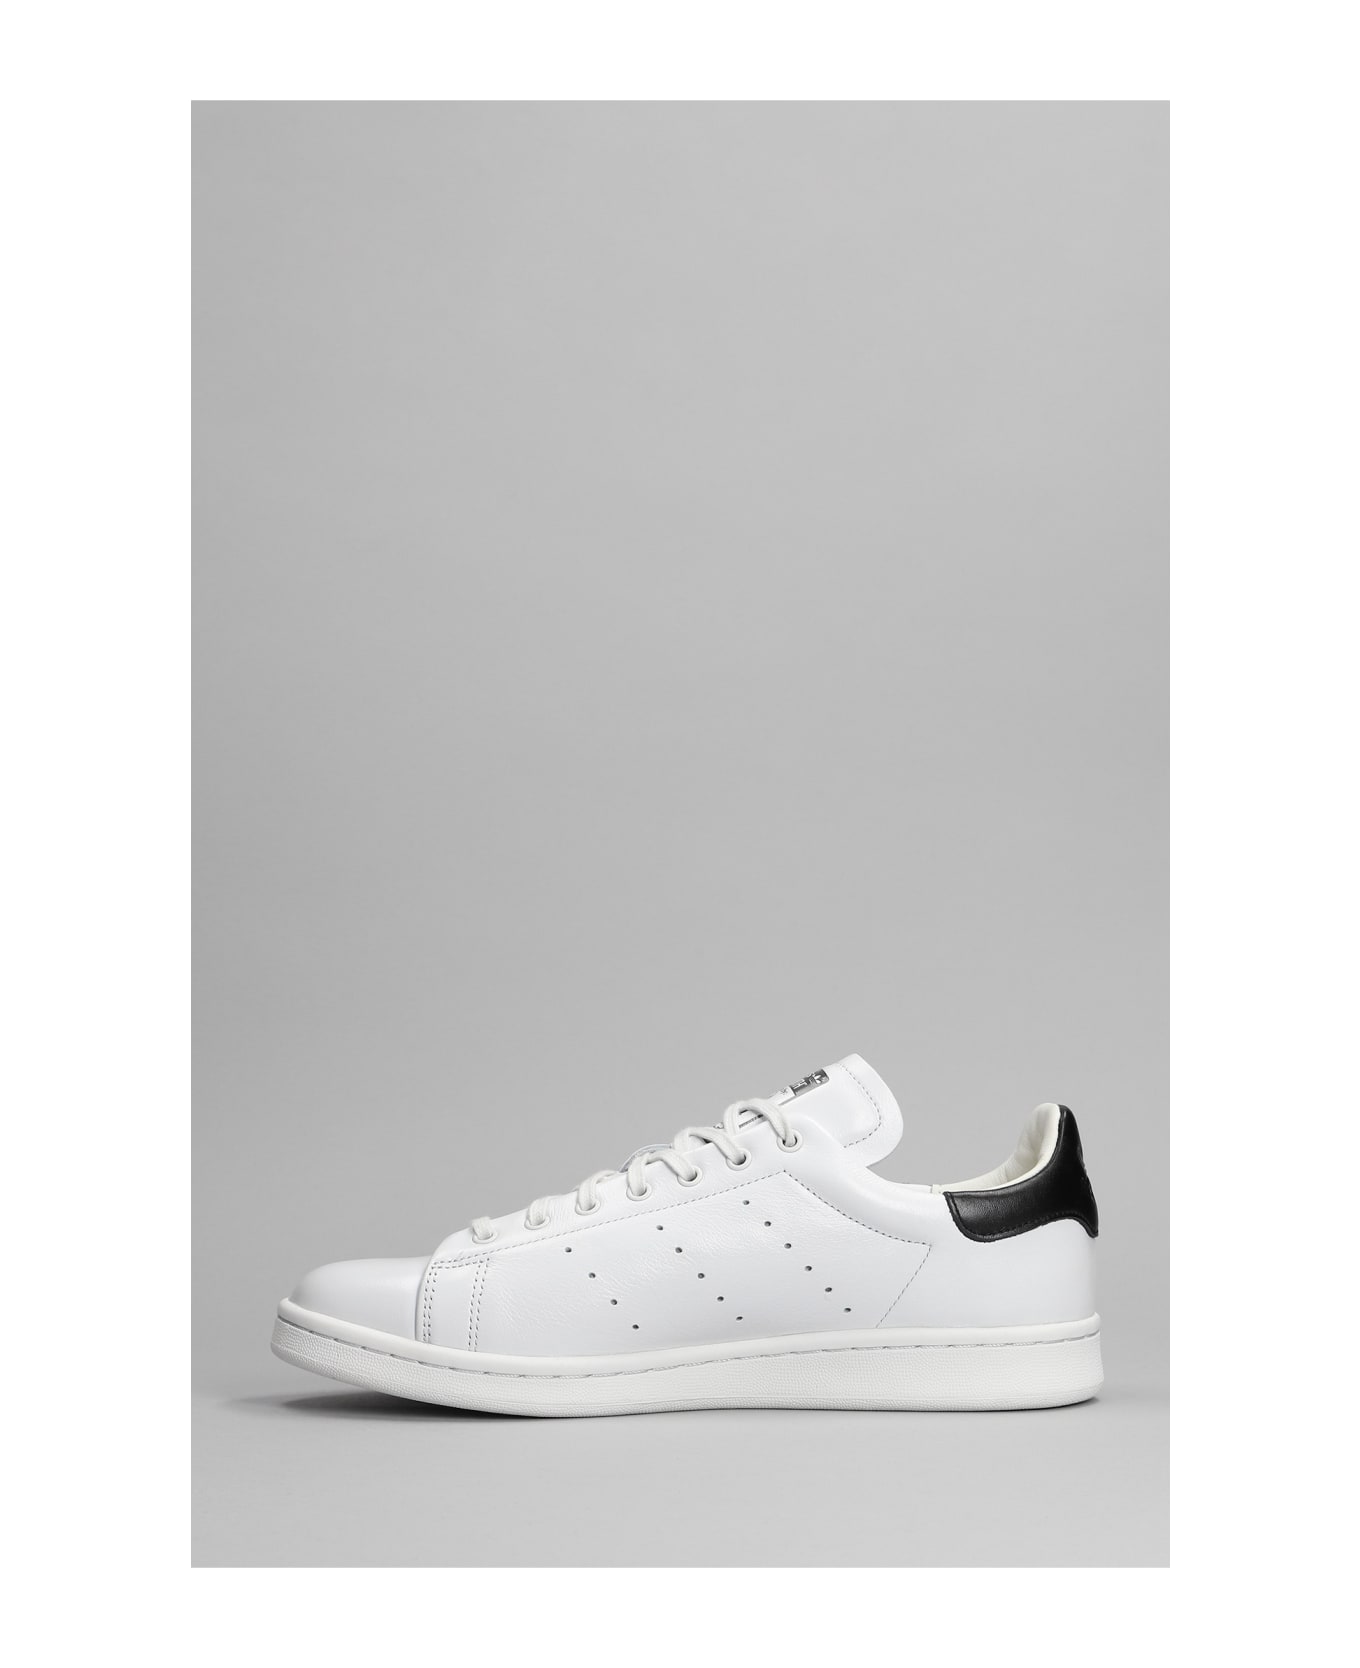 Adidas Stan Smith Lux Sneakers In White Leather - WHITE スニーカー